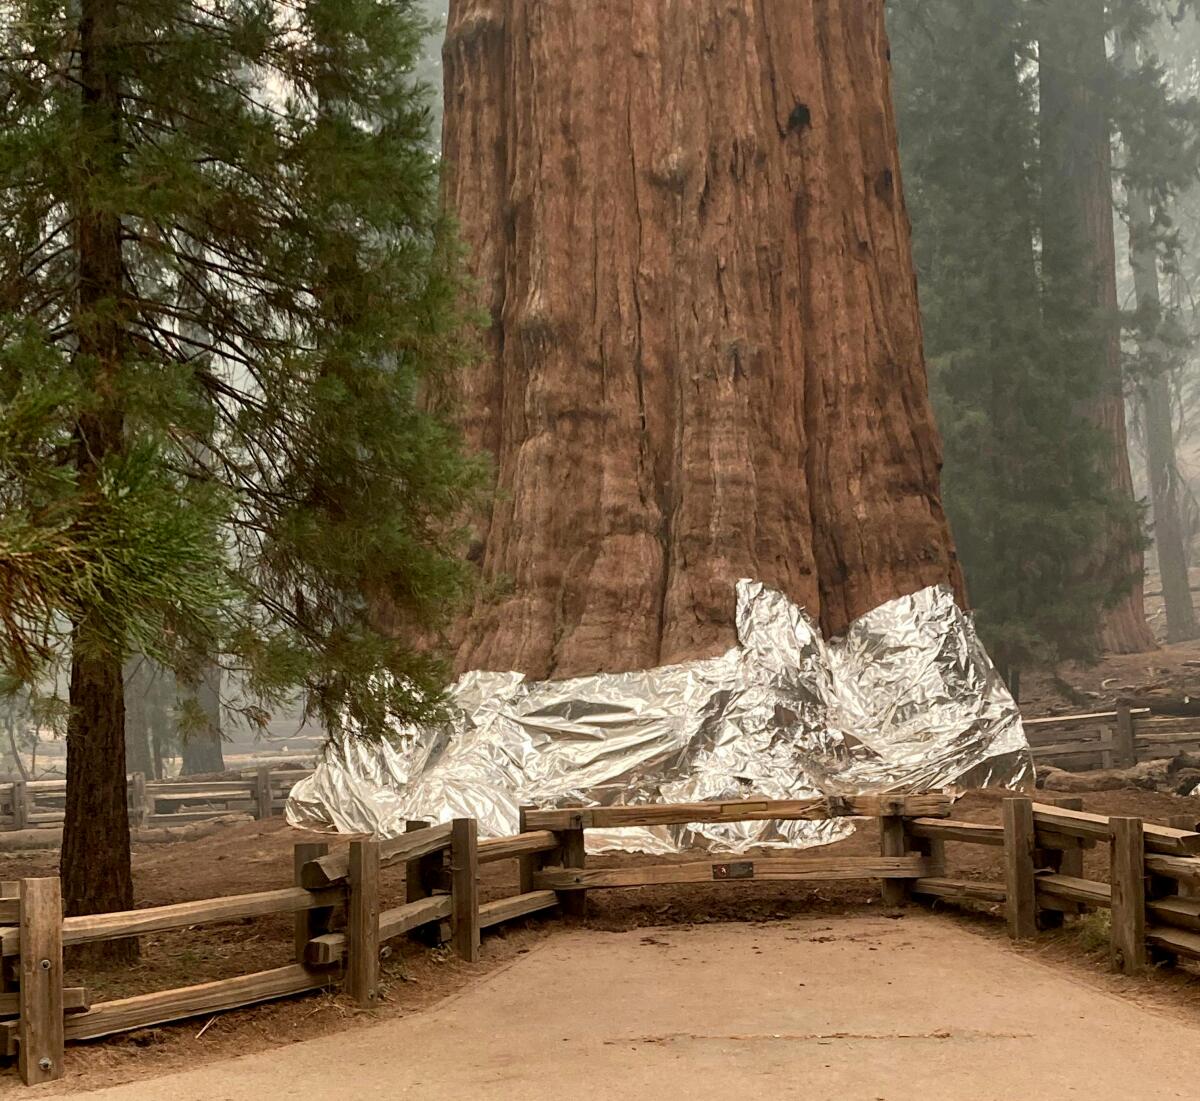 A fire-resistant material surrounds the base of the General Sherman tree.